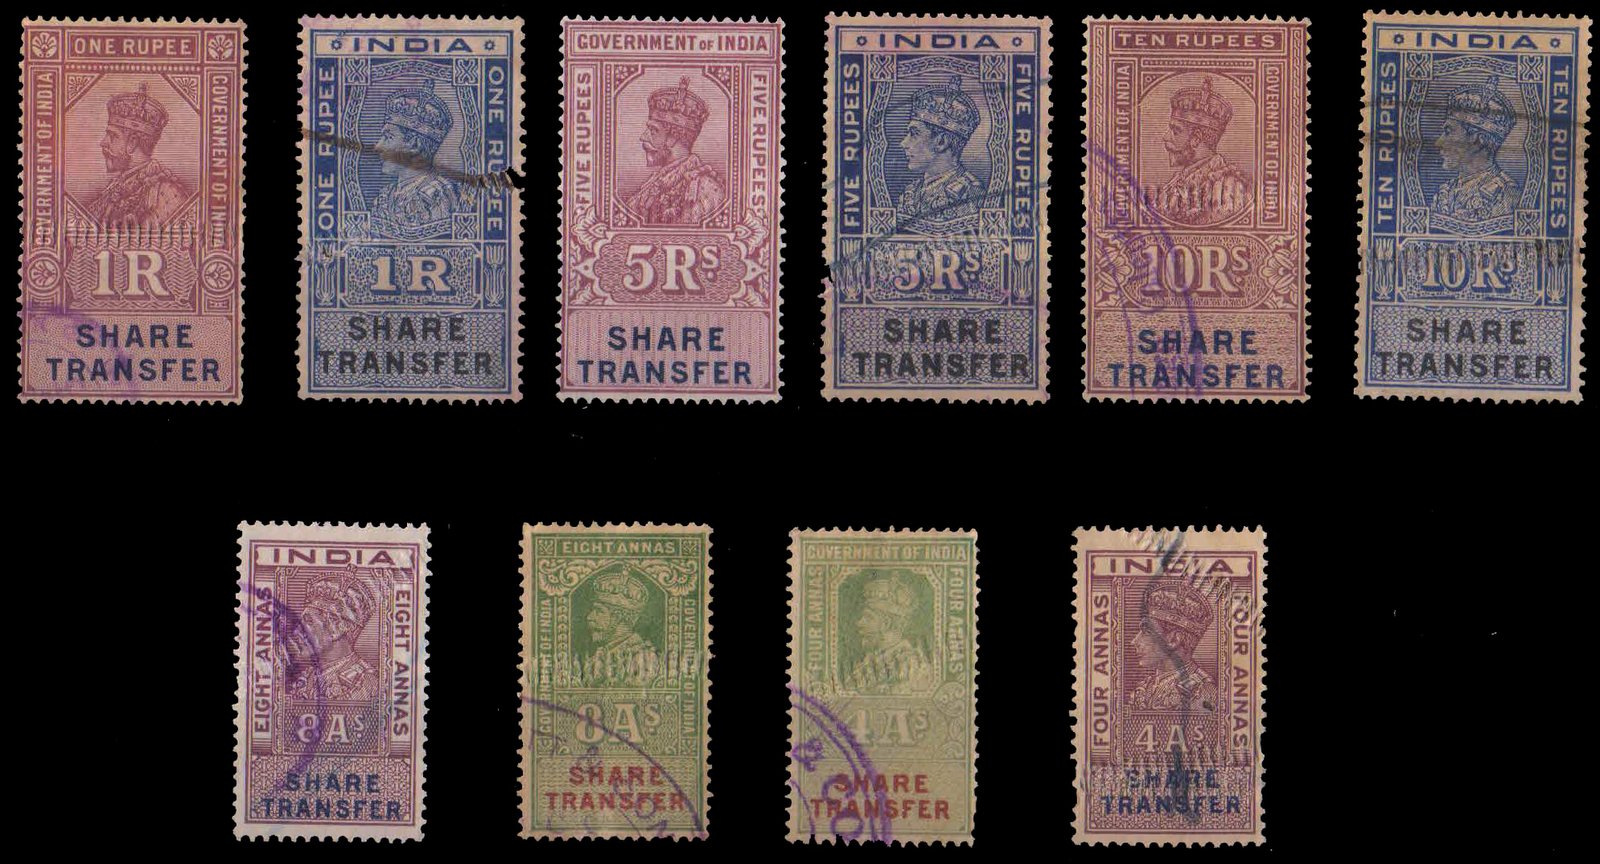 INDIA PRE INDEPENDENCE, K.G. V & K.G. VI-Share Transfer 10 Different Used Stamps-Revenue-Fiscal-Good Condition as per Scan